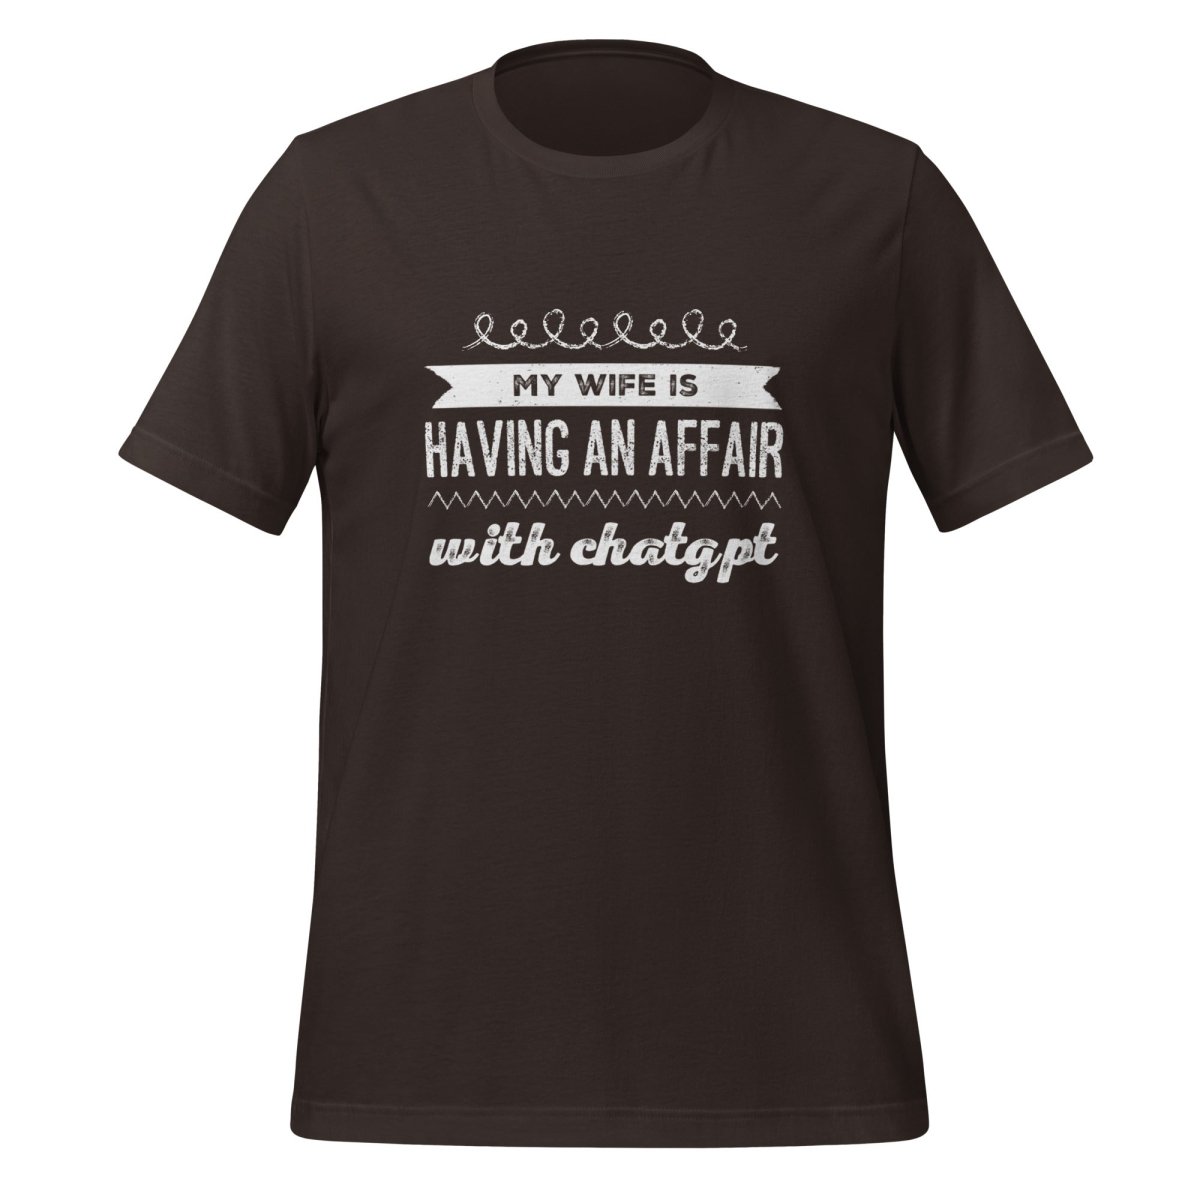 My Wife is Having an Affair with ChatGPT T - Shirt (unisex) - Brown - AI Store